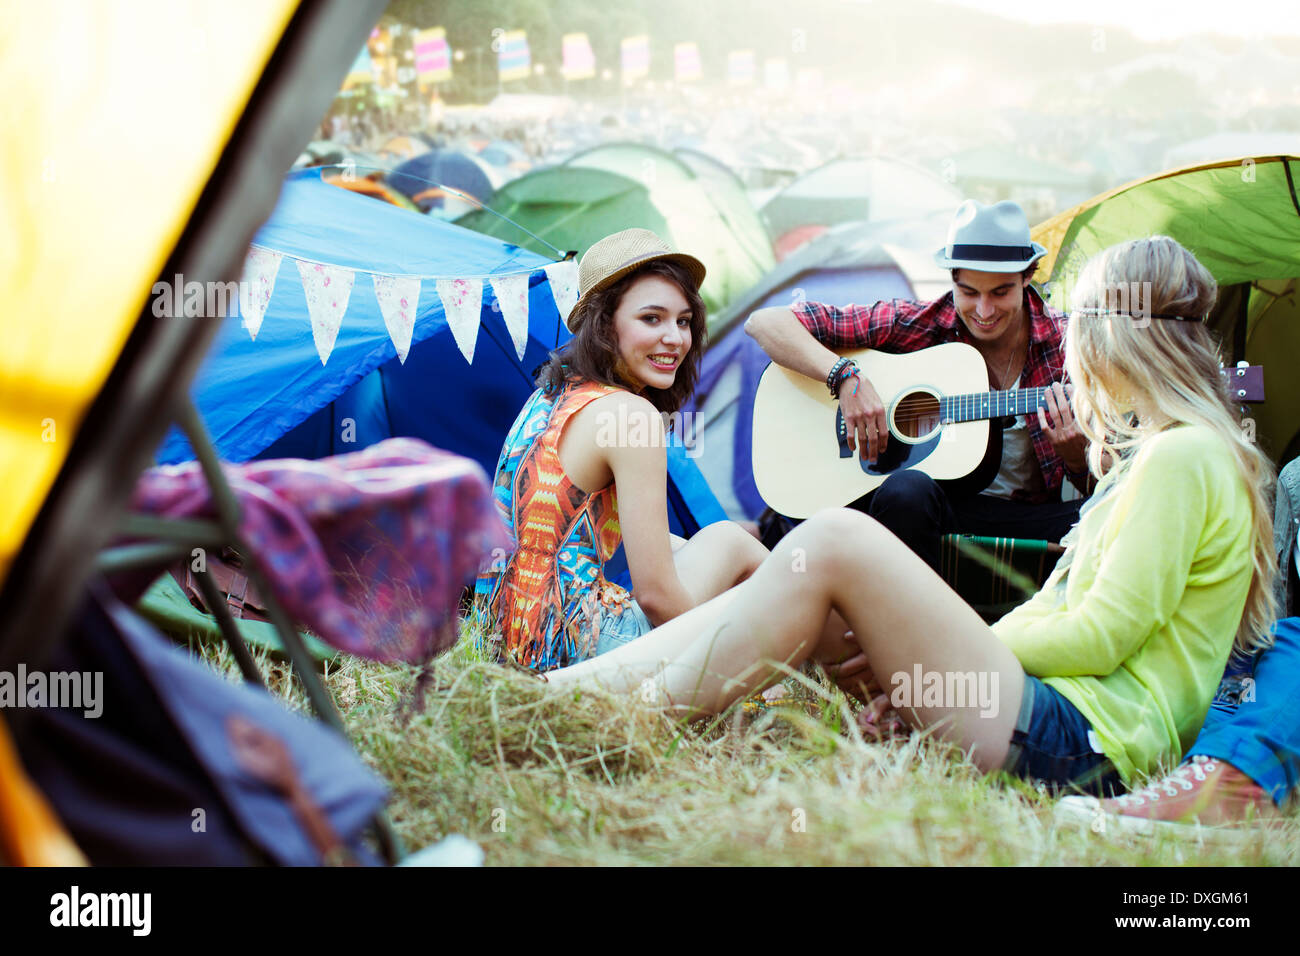 Friends with guitar hanging out near tents at music festival Stock Photo